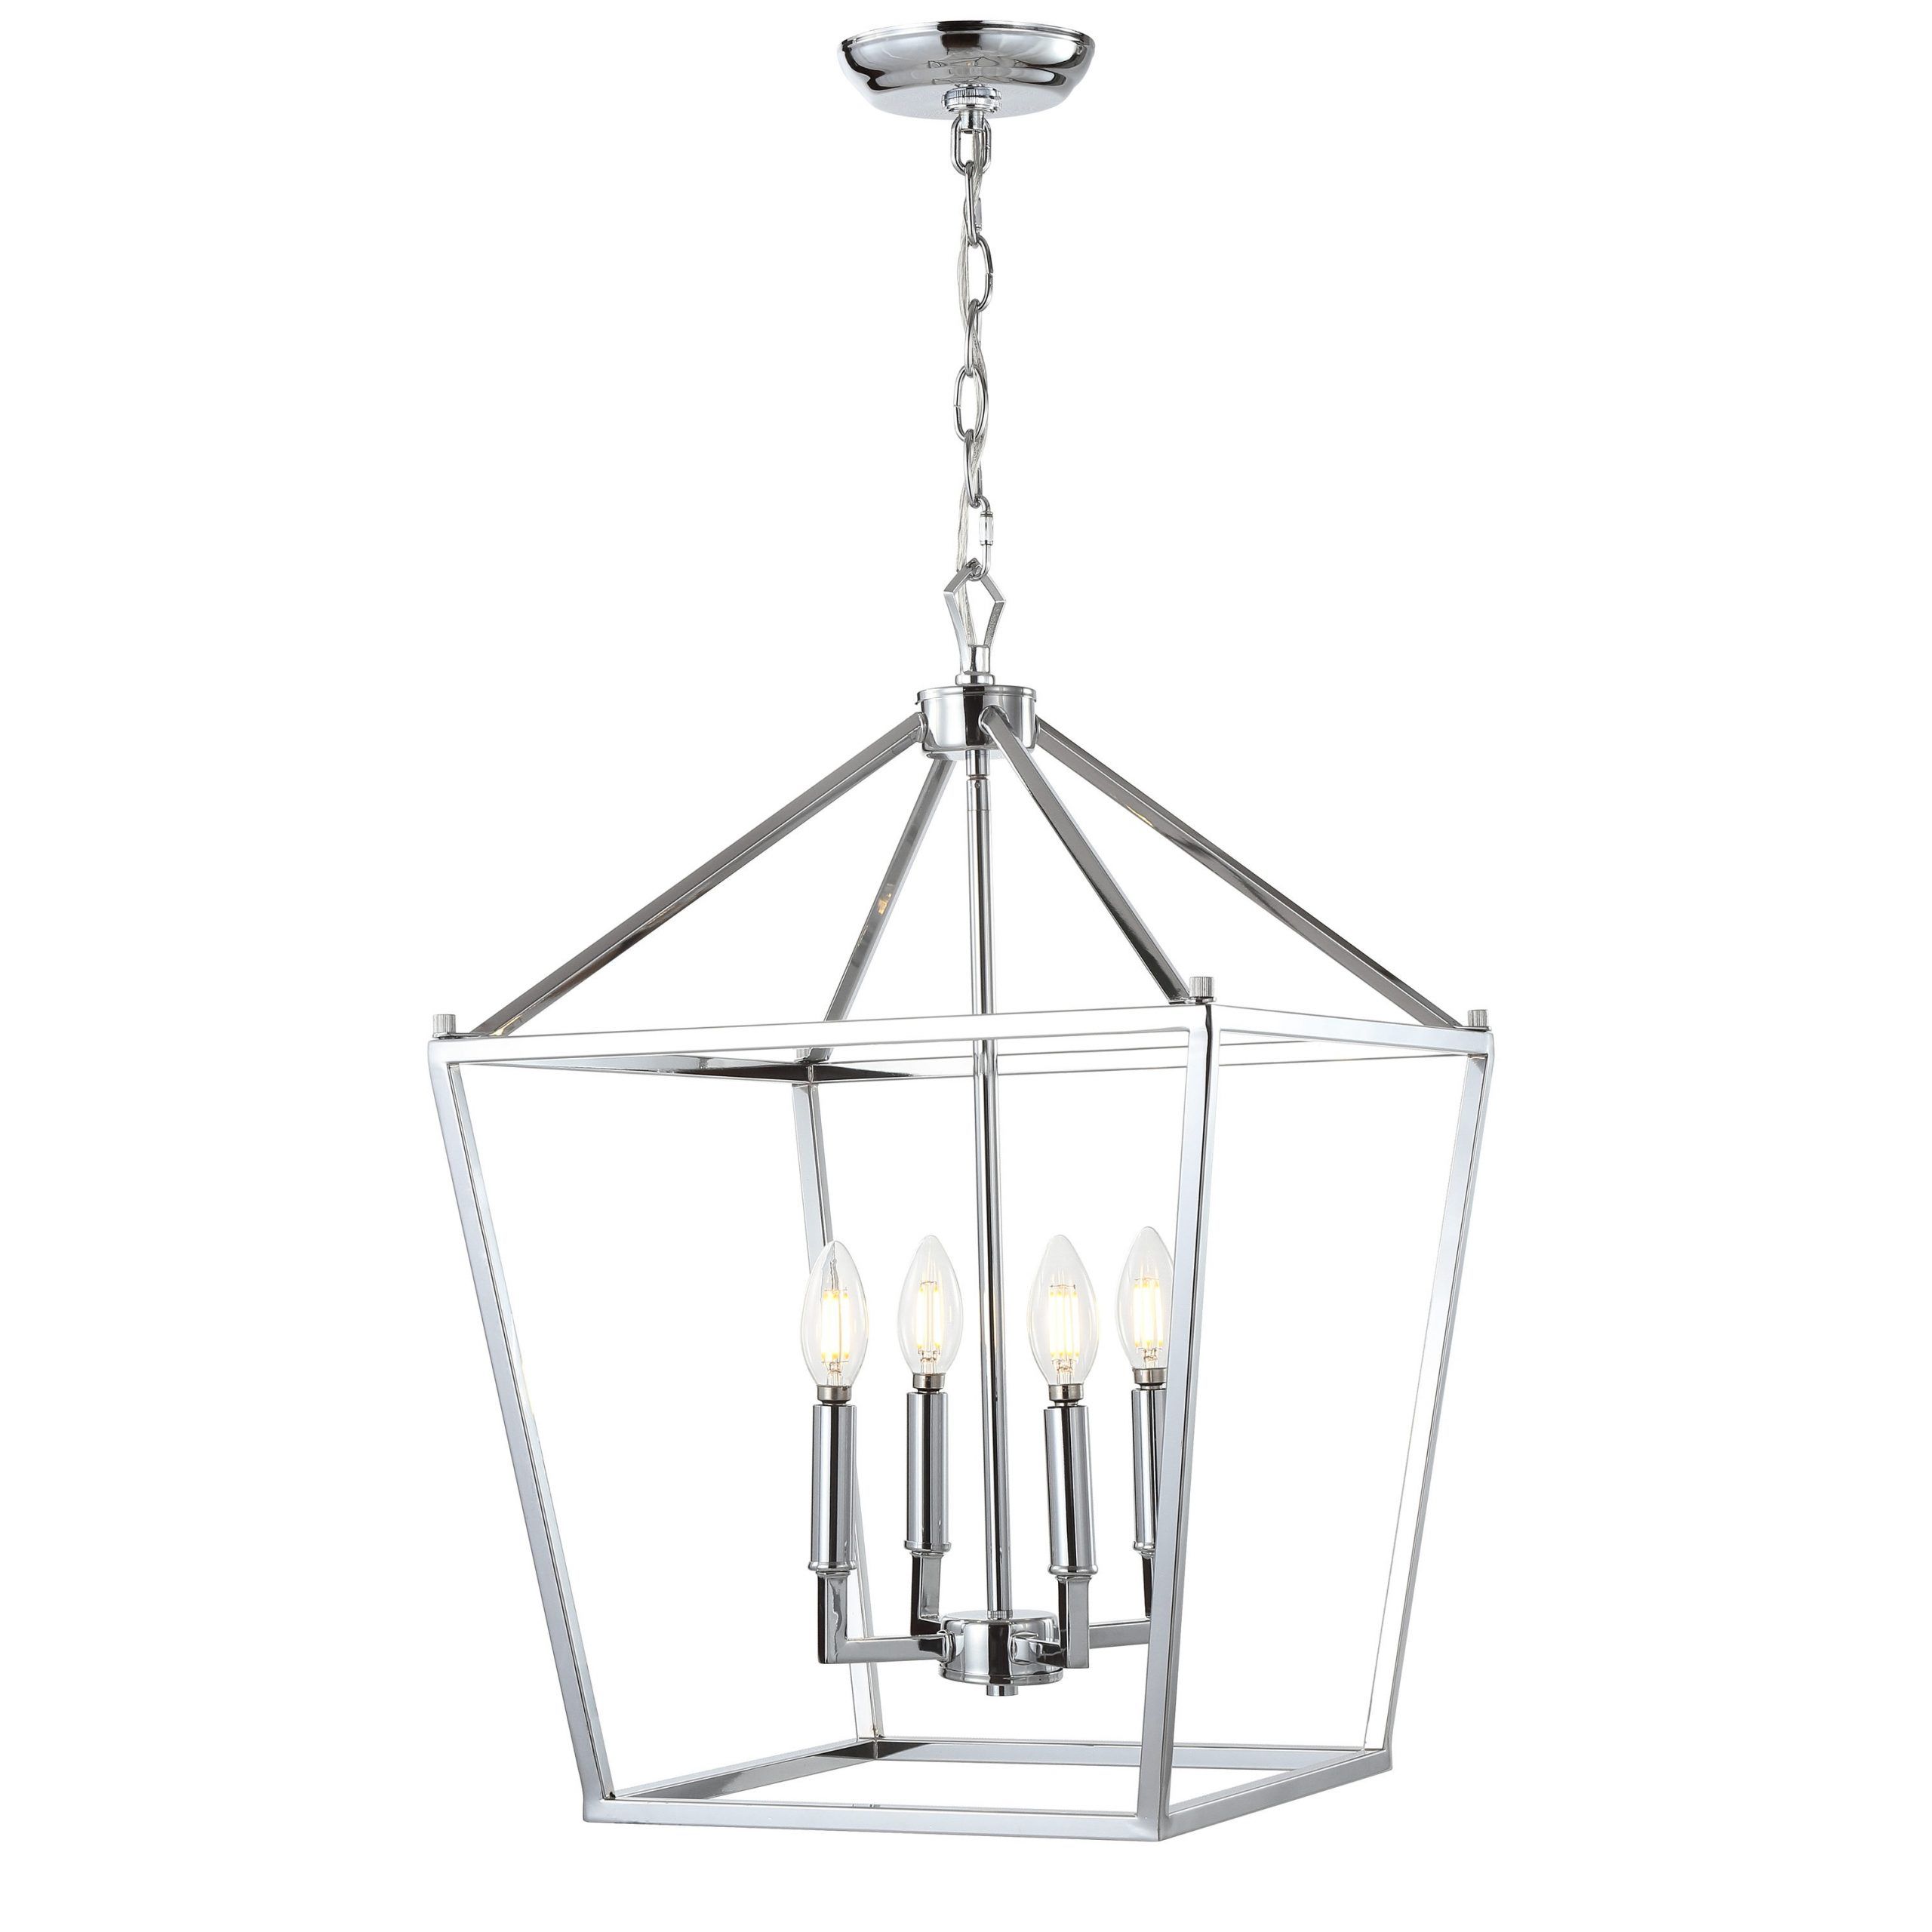 Well Known Chrome Lantern Pendant Lighting At Lowes With Chrome Lantern Chandeliers (View 9 of 15)